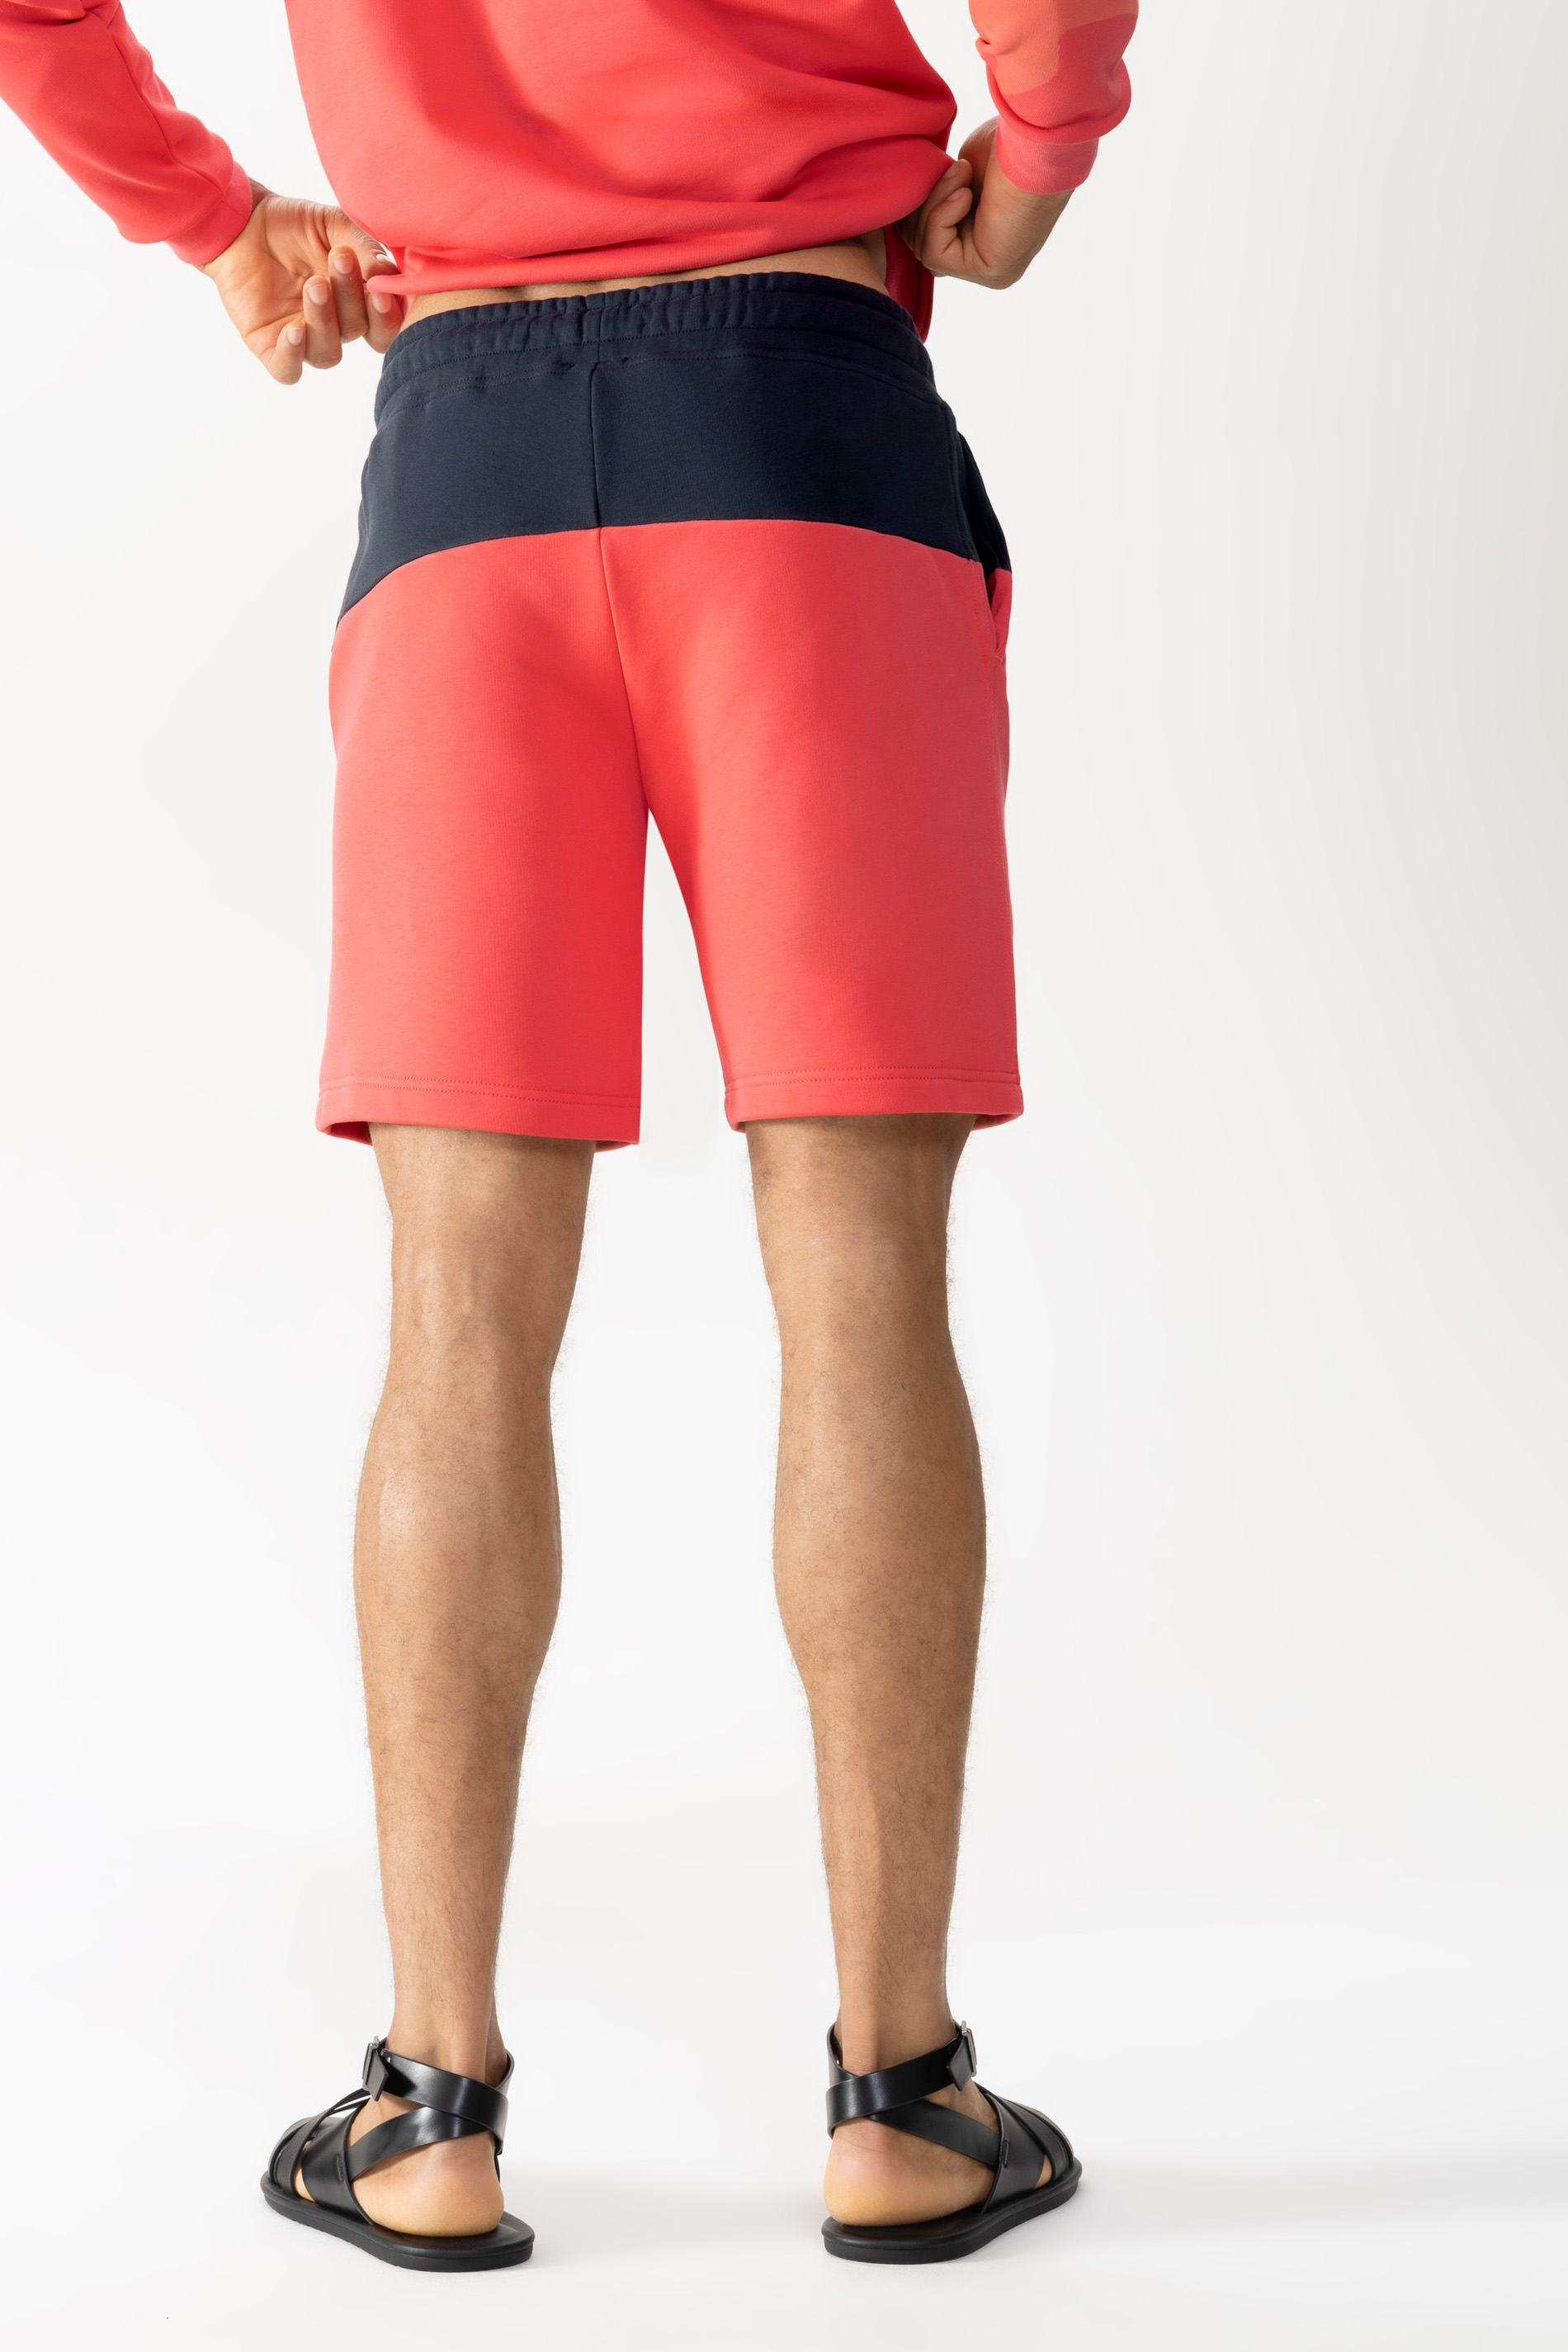 Track shorts Serie Lido Rear View | mey®